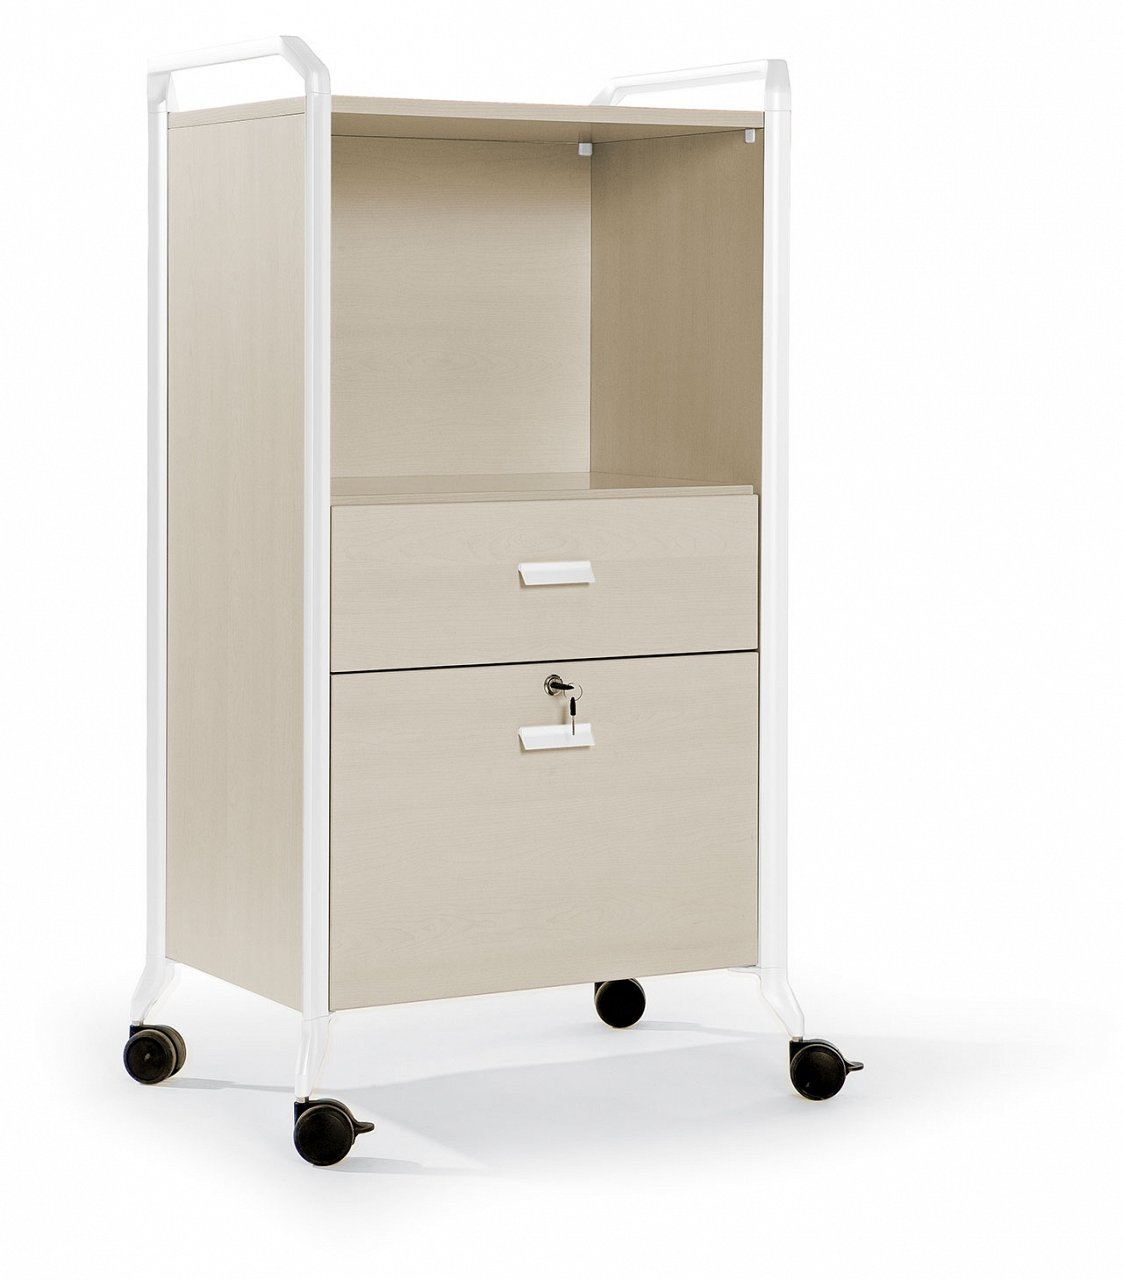 On Time Storage cabinet from Actiu